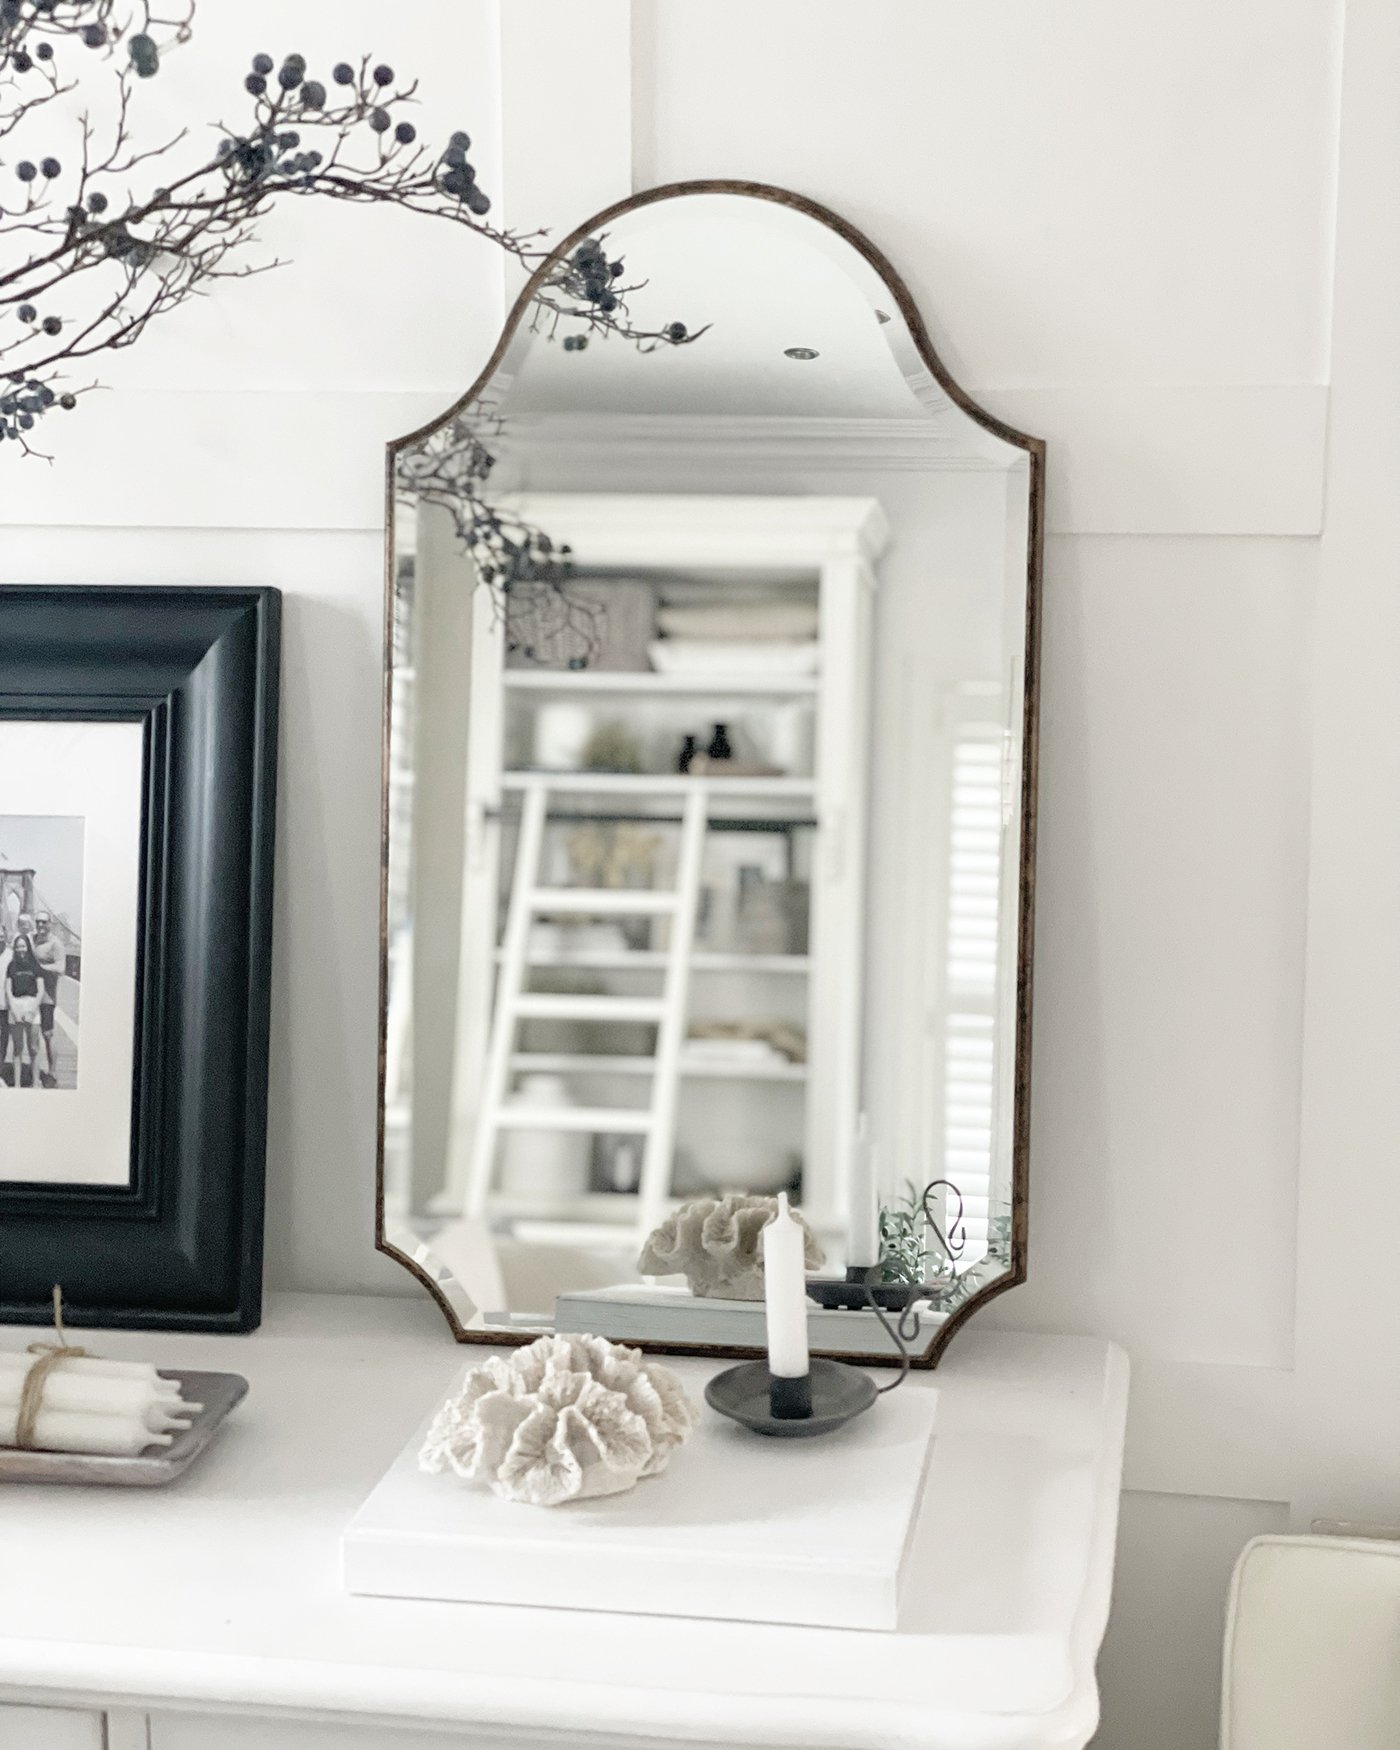 Waterbury mirror in a New England styled white living room - coastal, country and modern farmhouse furniture and decor